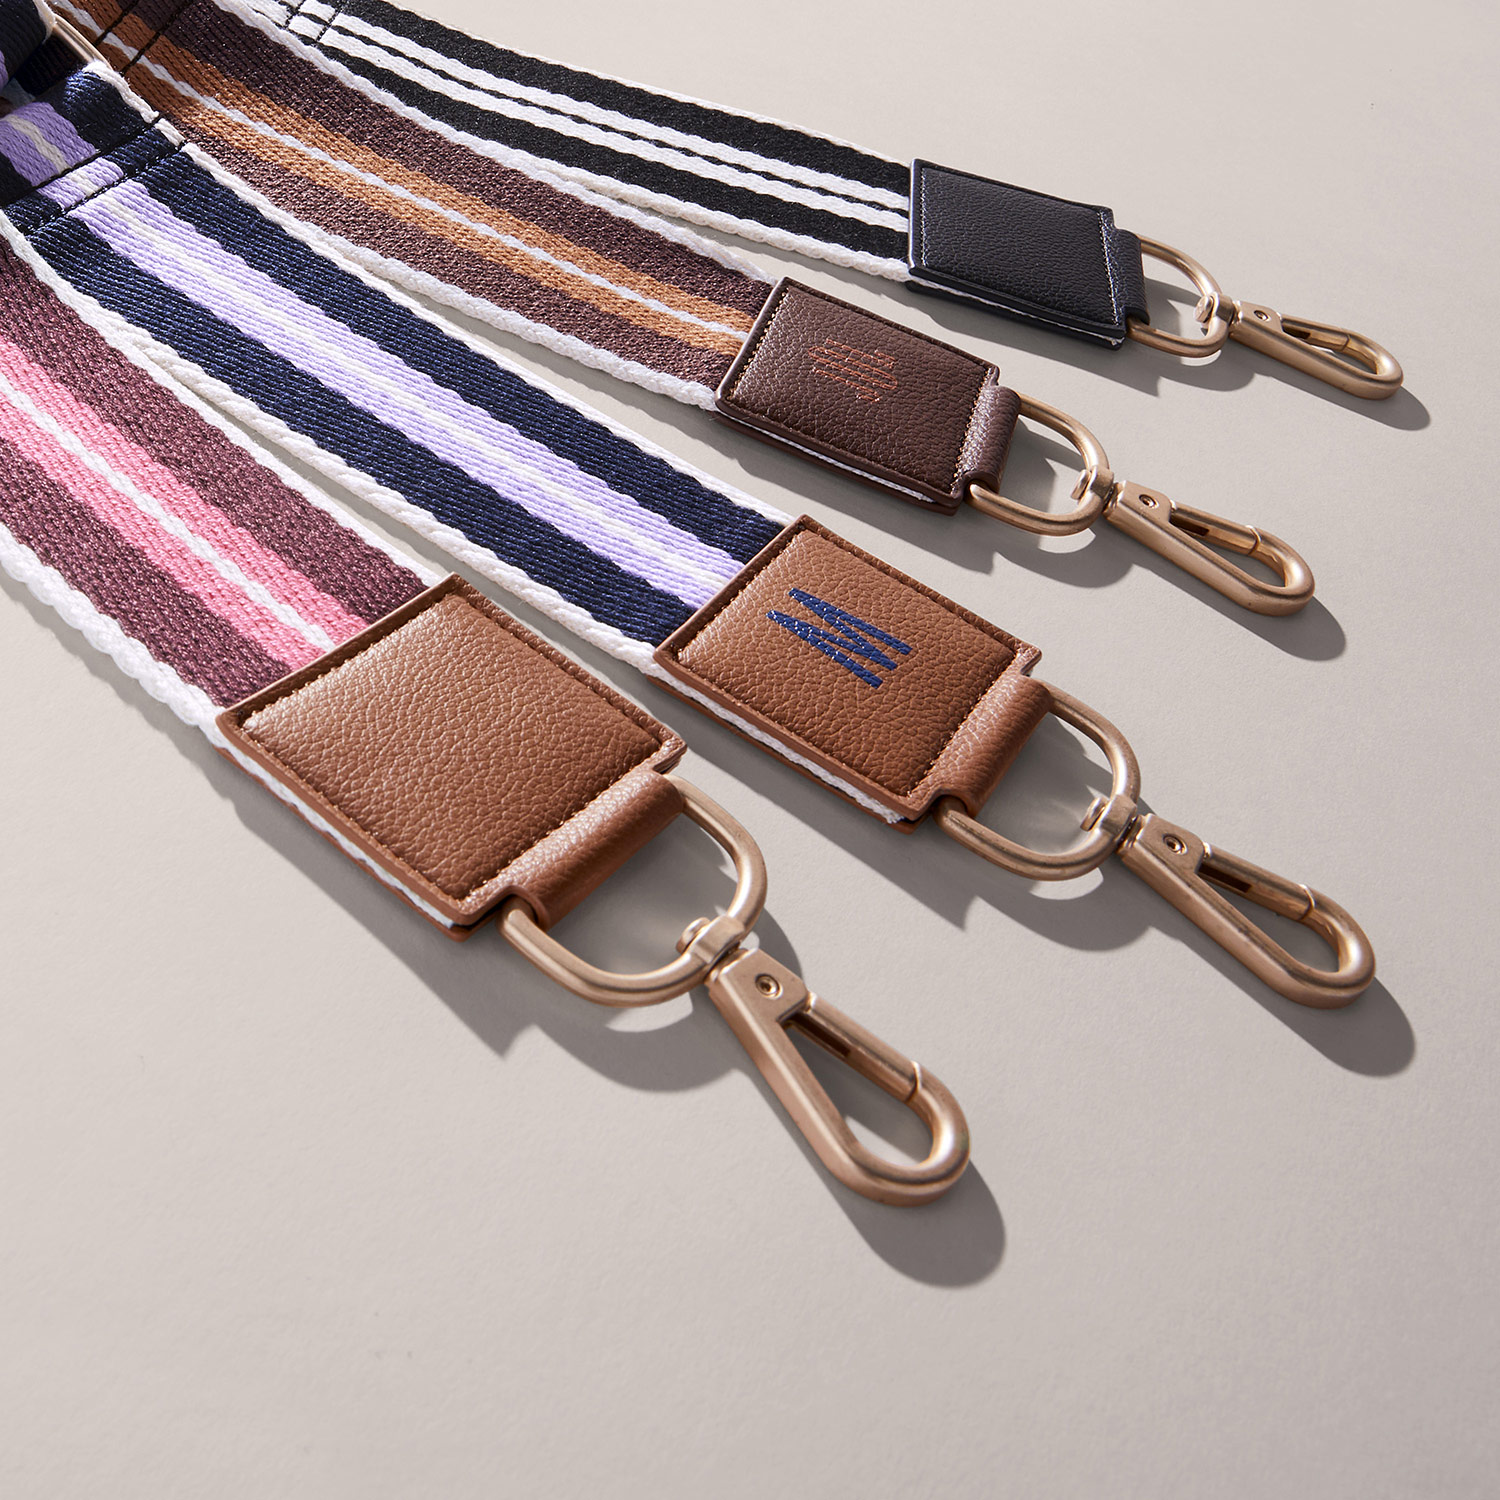 Crossbody Bags + Straps That You Can Mix and Match, H. Prall